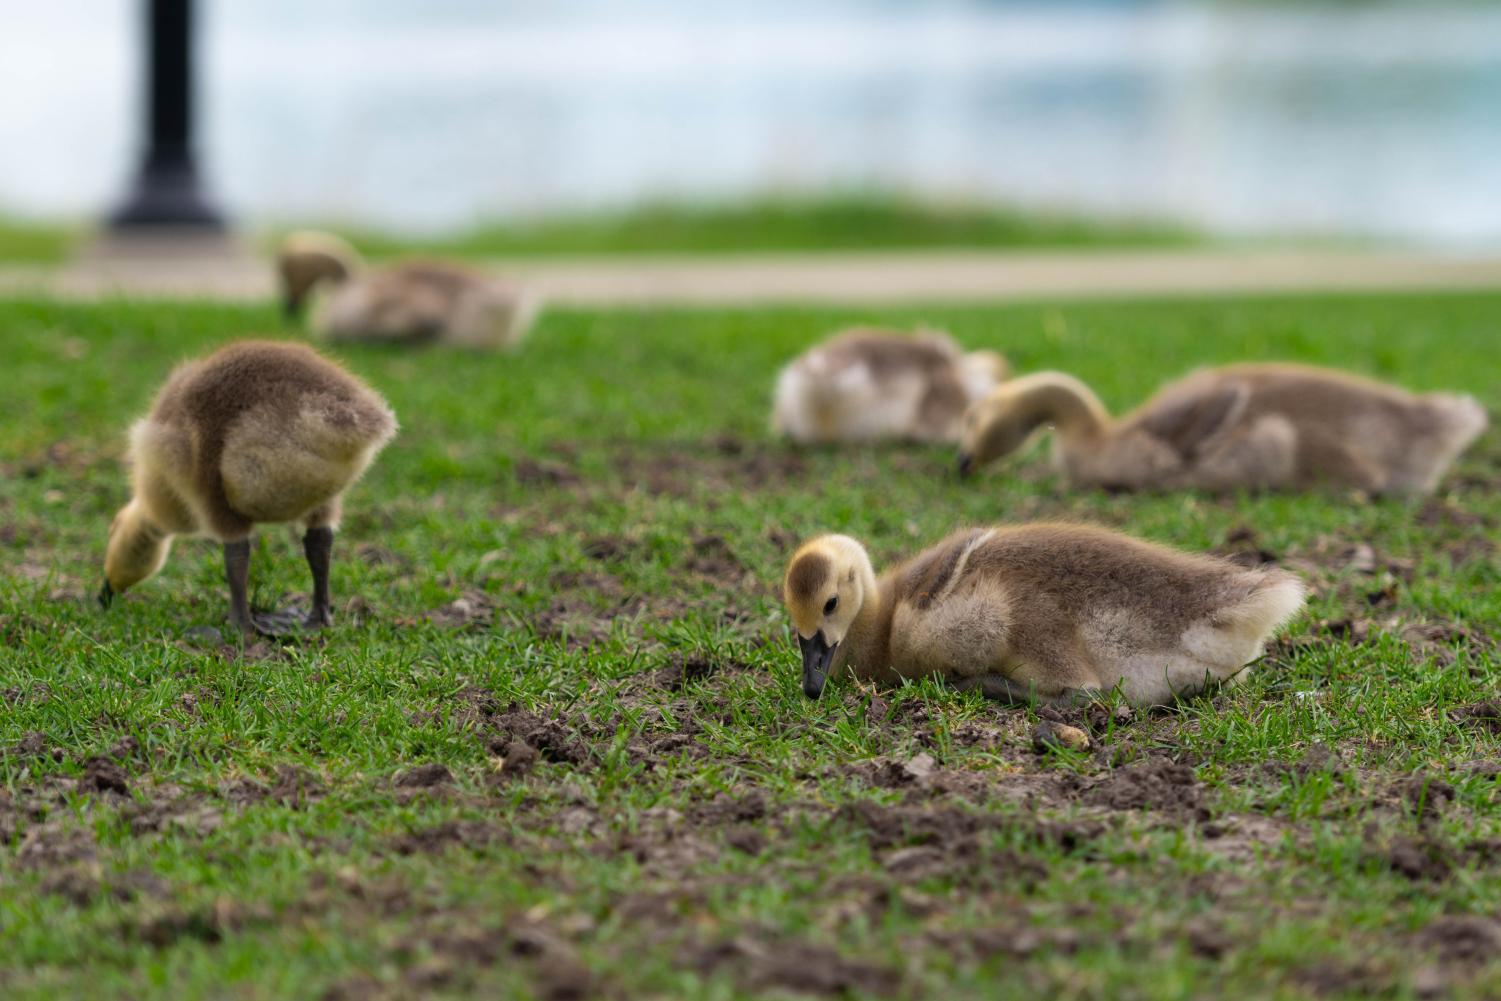 A group of goslings sit and walk on grass.